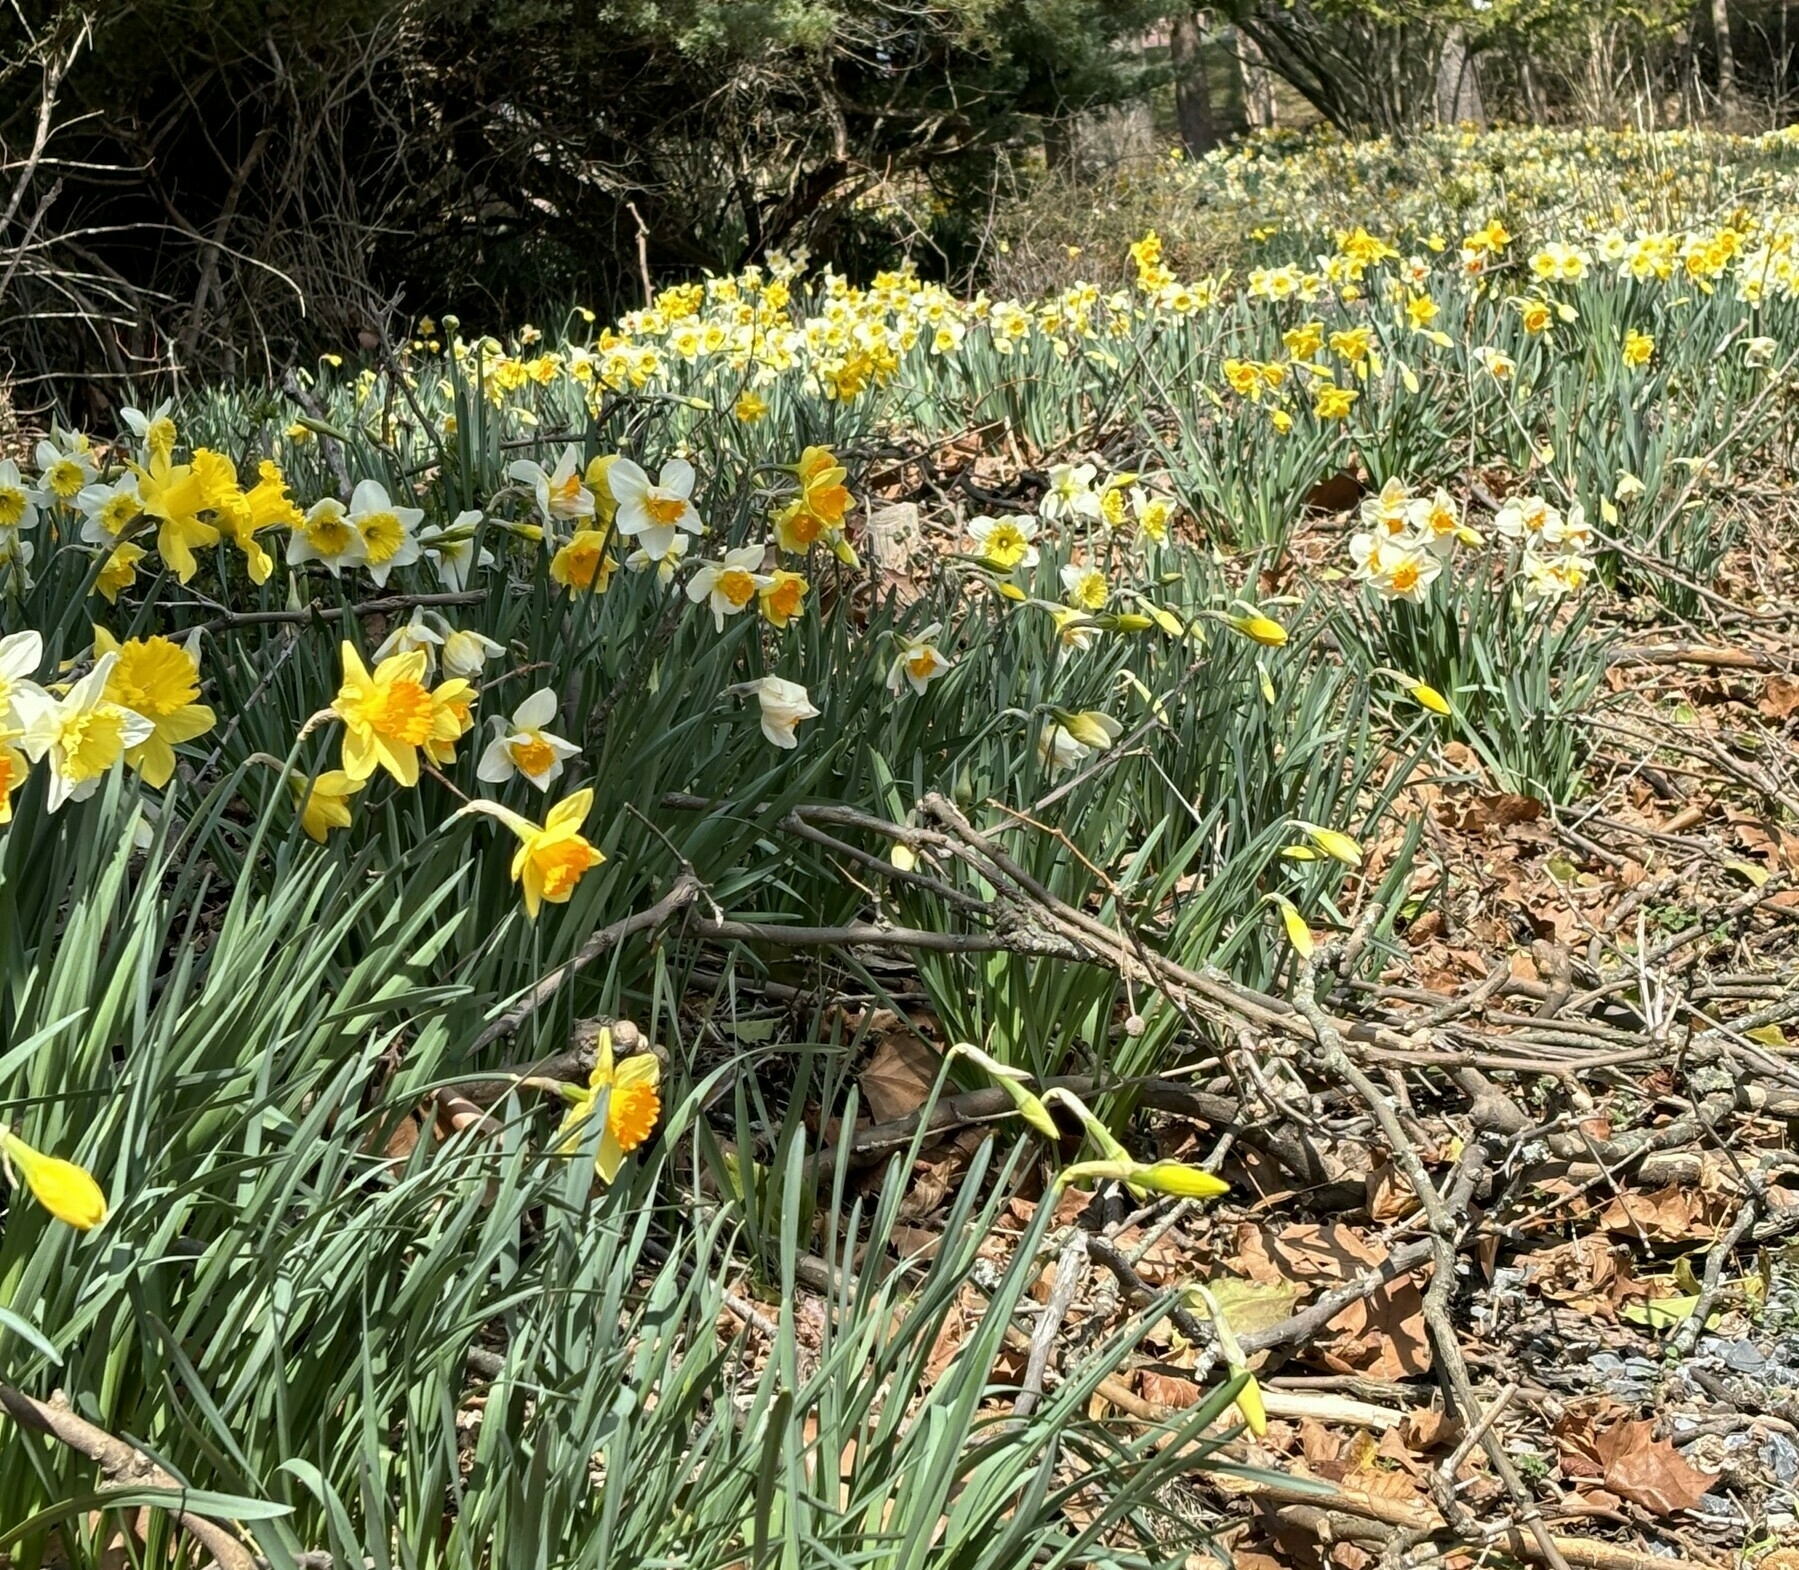 thousands of daffodils in bloom